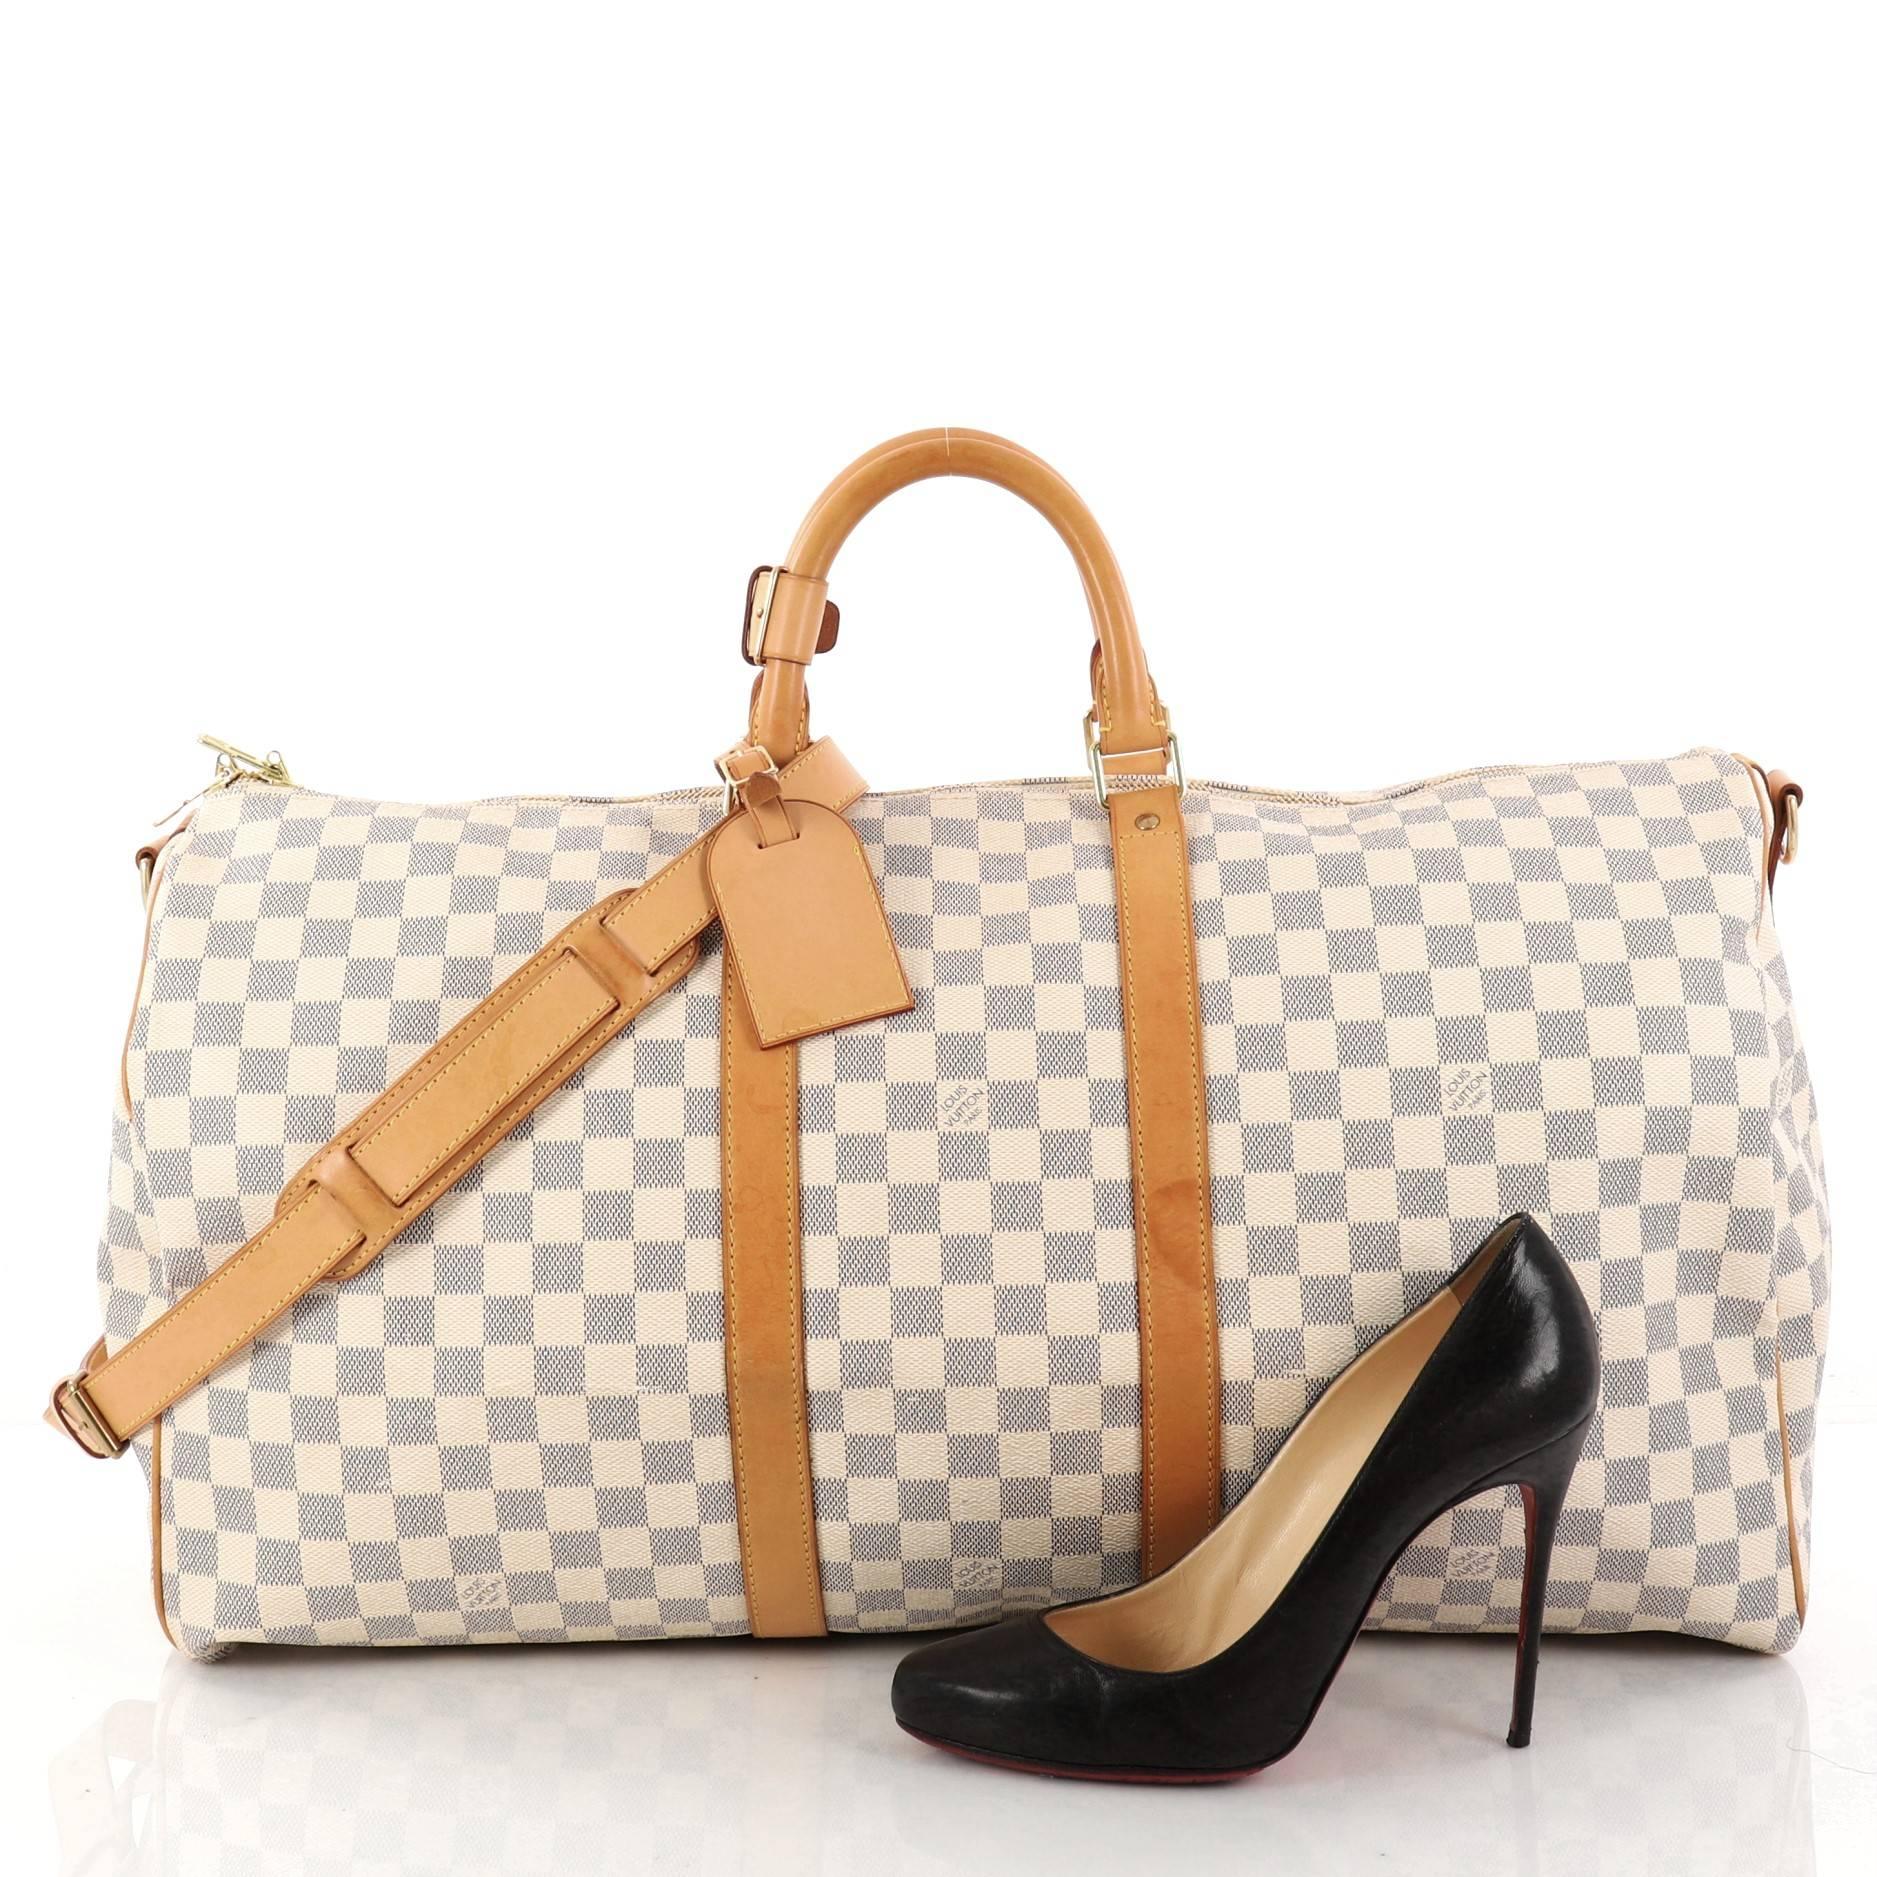 This authentic Louis Vuitton Keepall Bandouliere Bag Damier 55 is the perfect purchase for a weekend trip, and can be effortlessly paired with any outfit from casual to formal. Crafted with traditional damier azur coated canvas, this classic